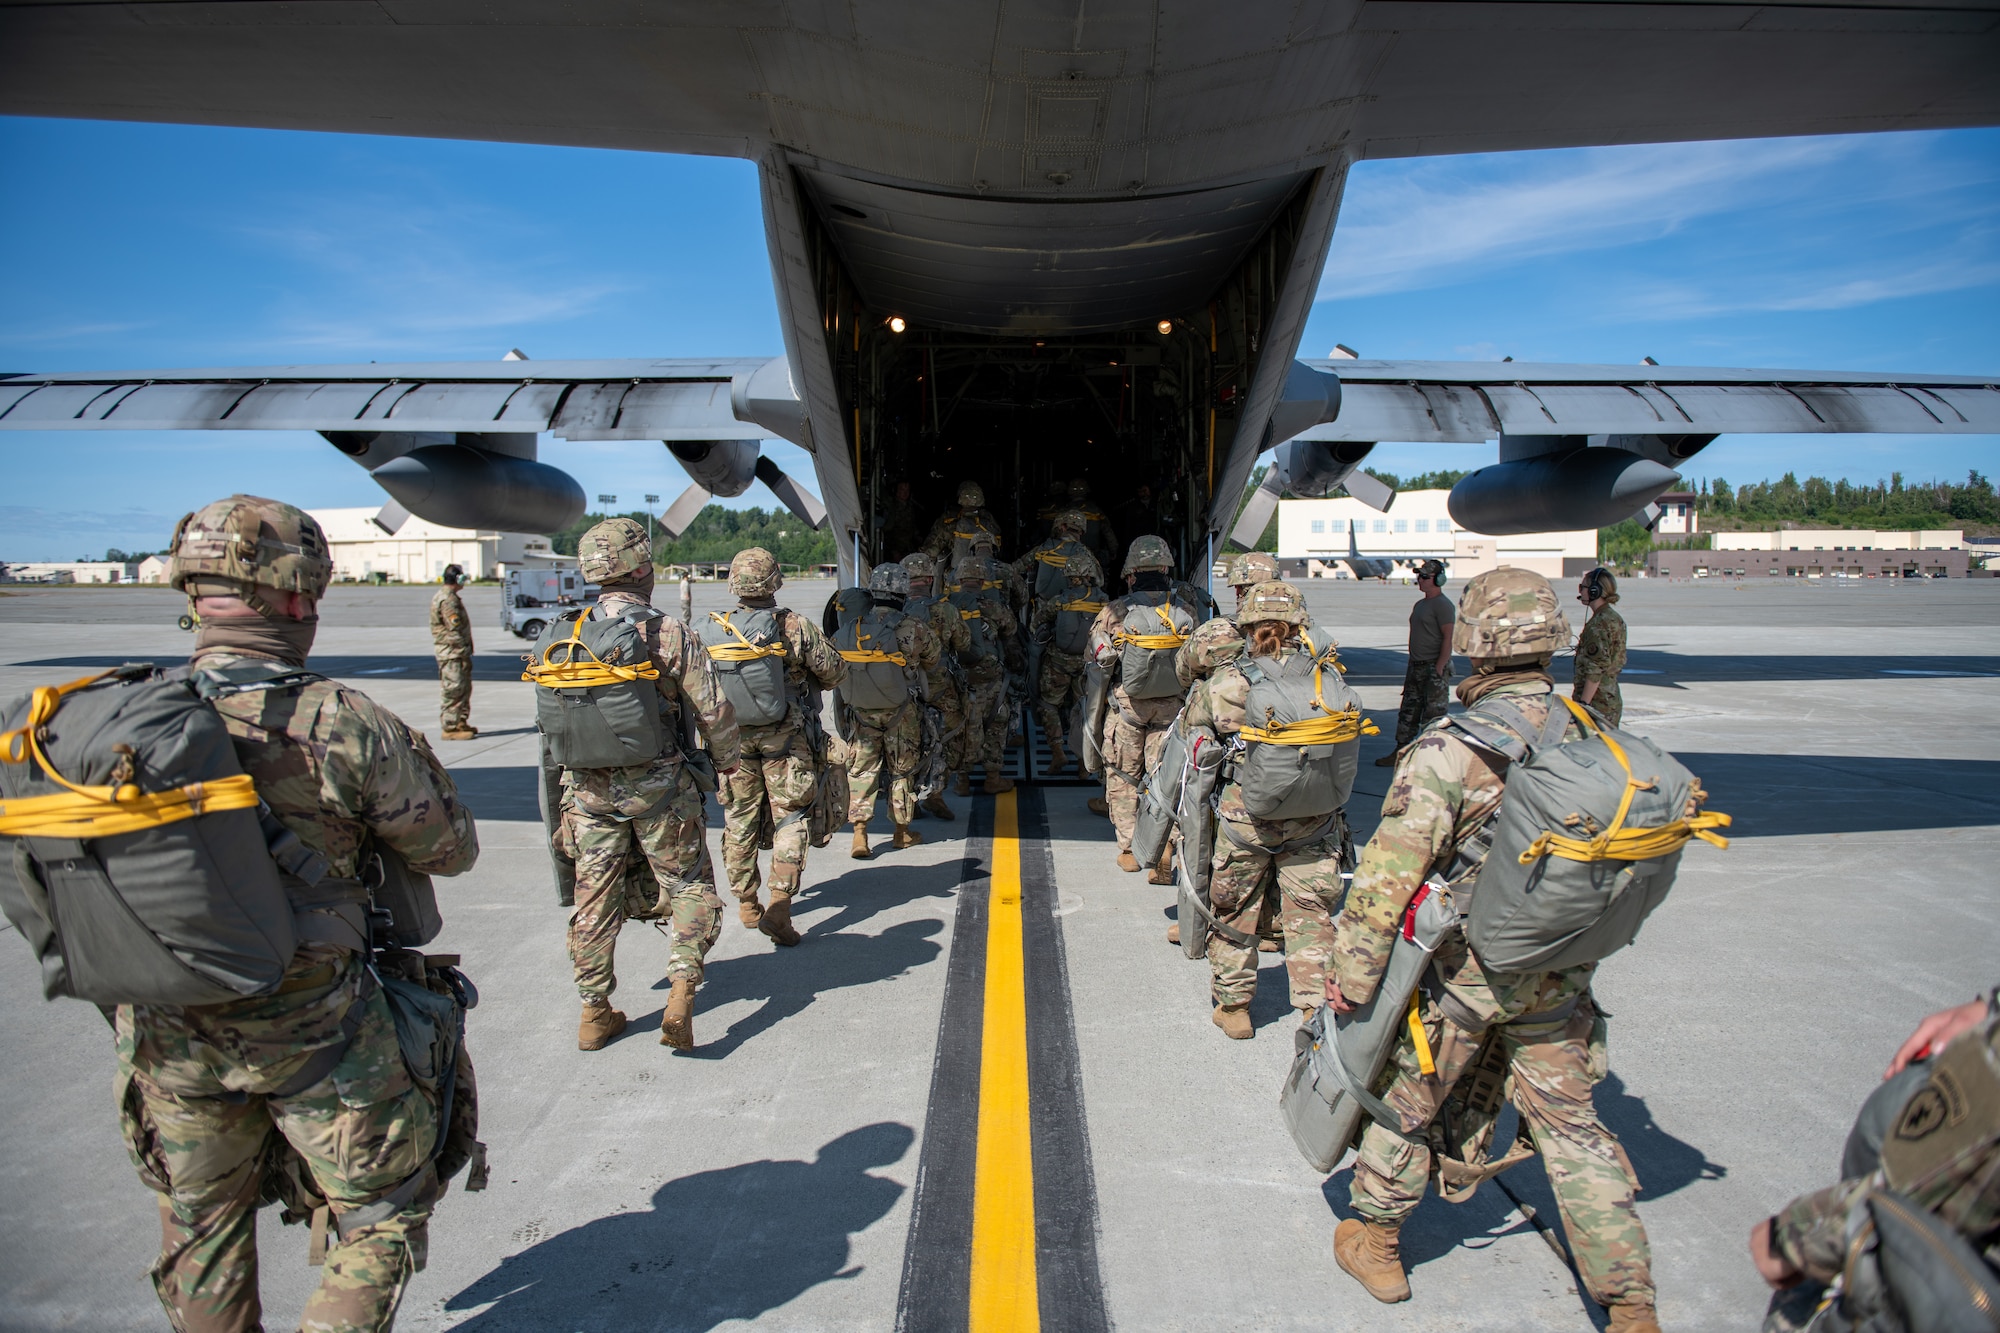 Army soldiers board a C-310 aircraft.